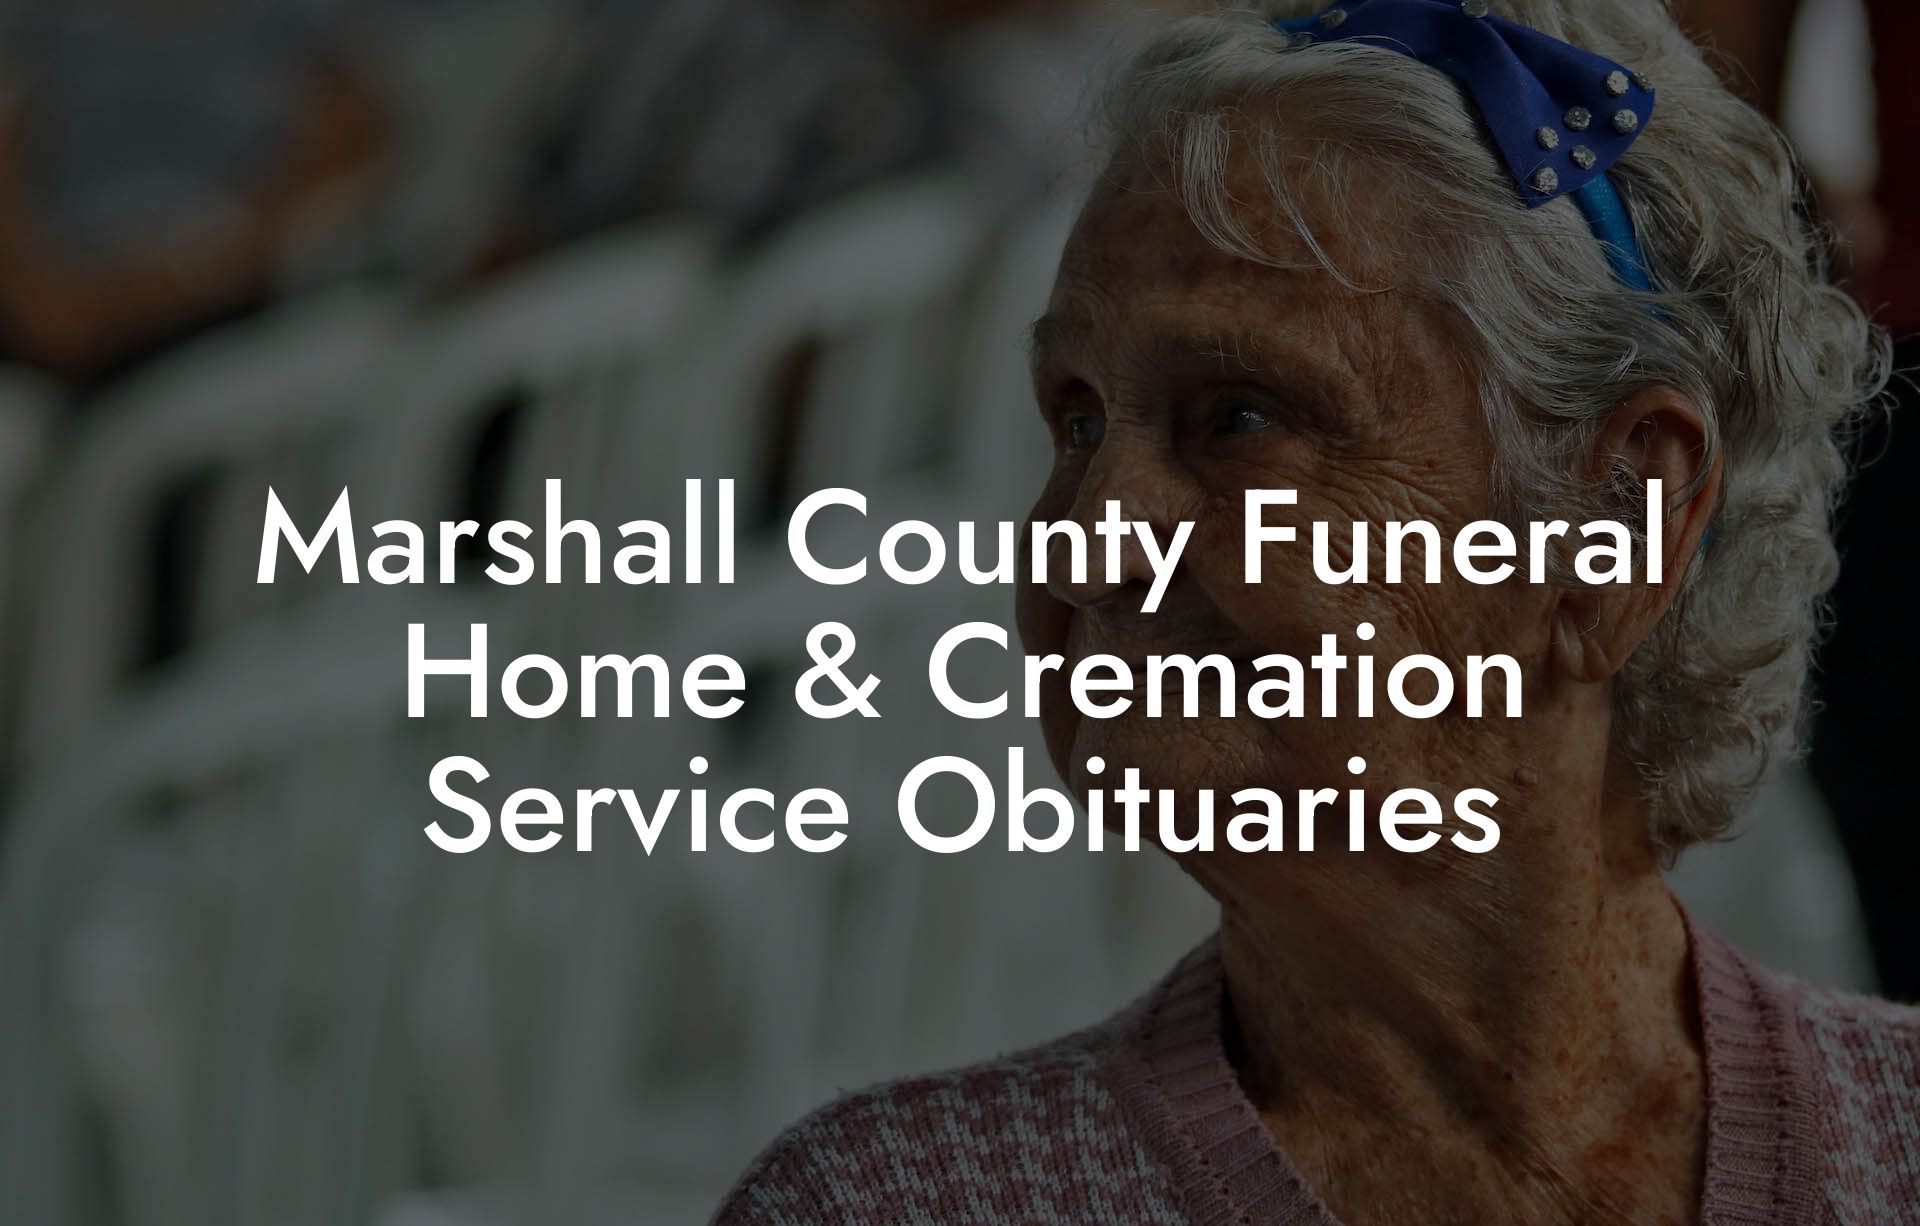 Marshall County Funeral Home & Cremation Service Obituaries